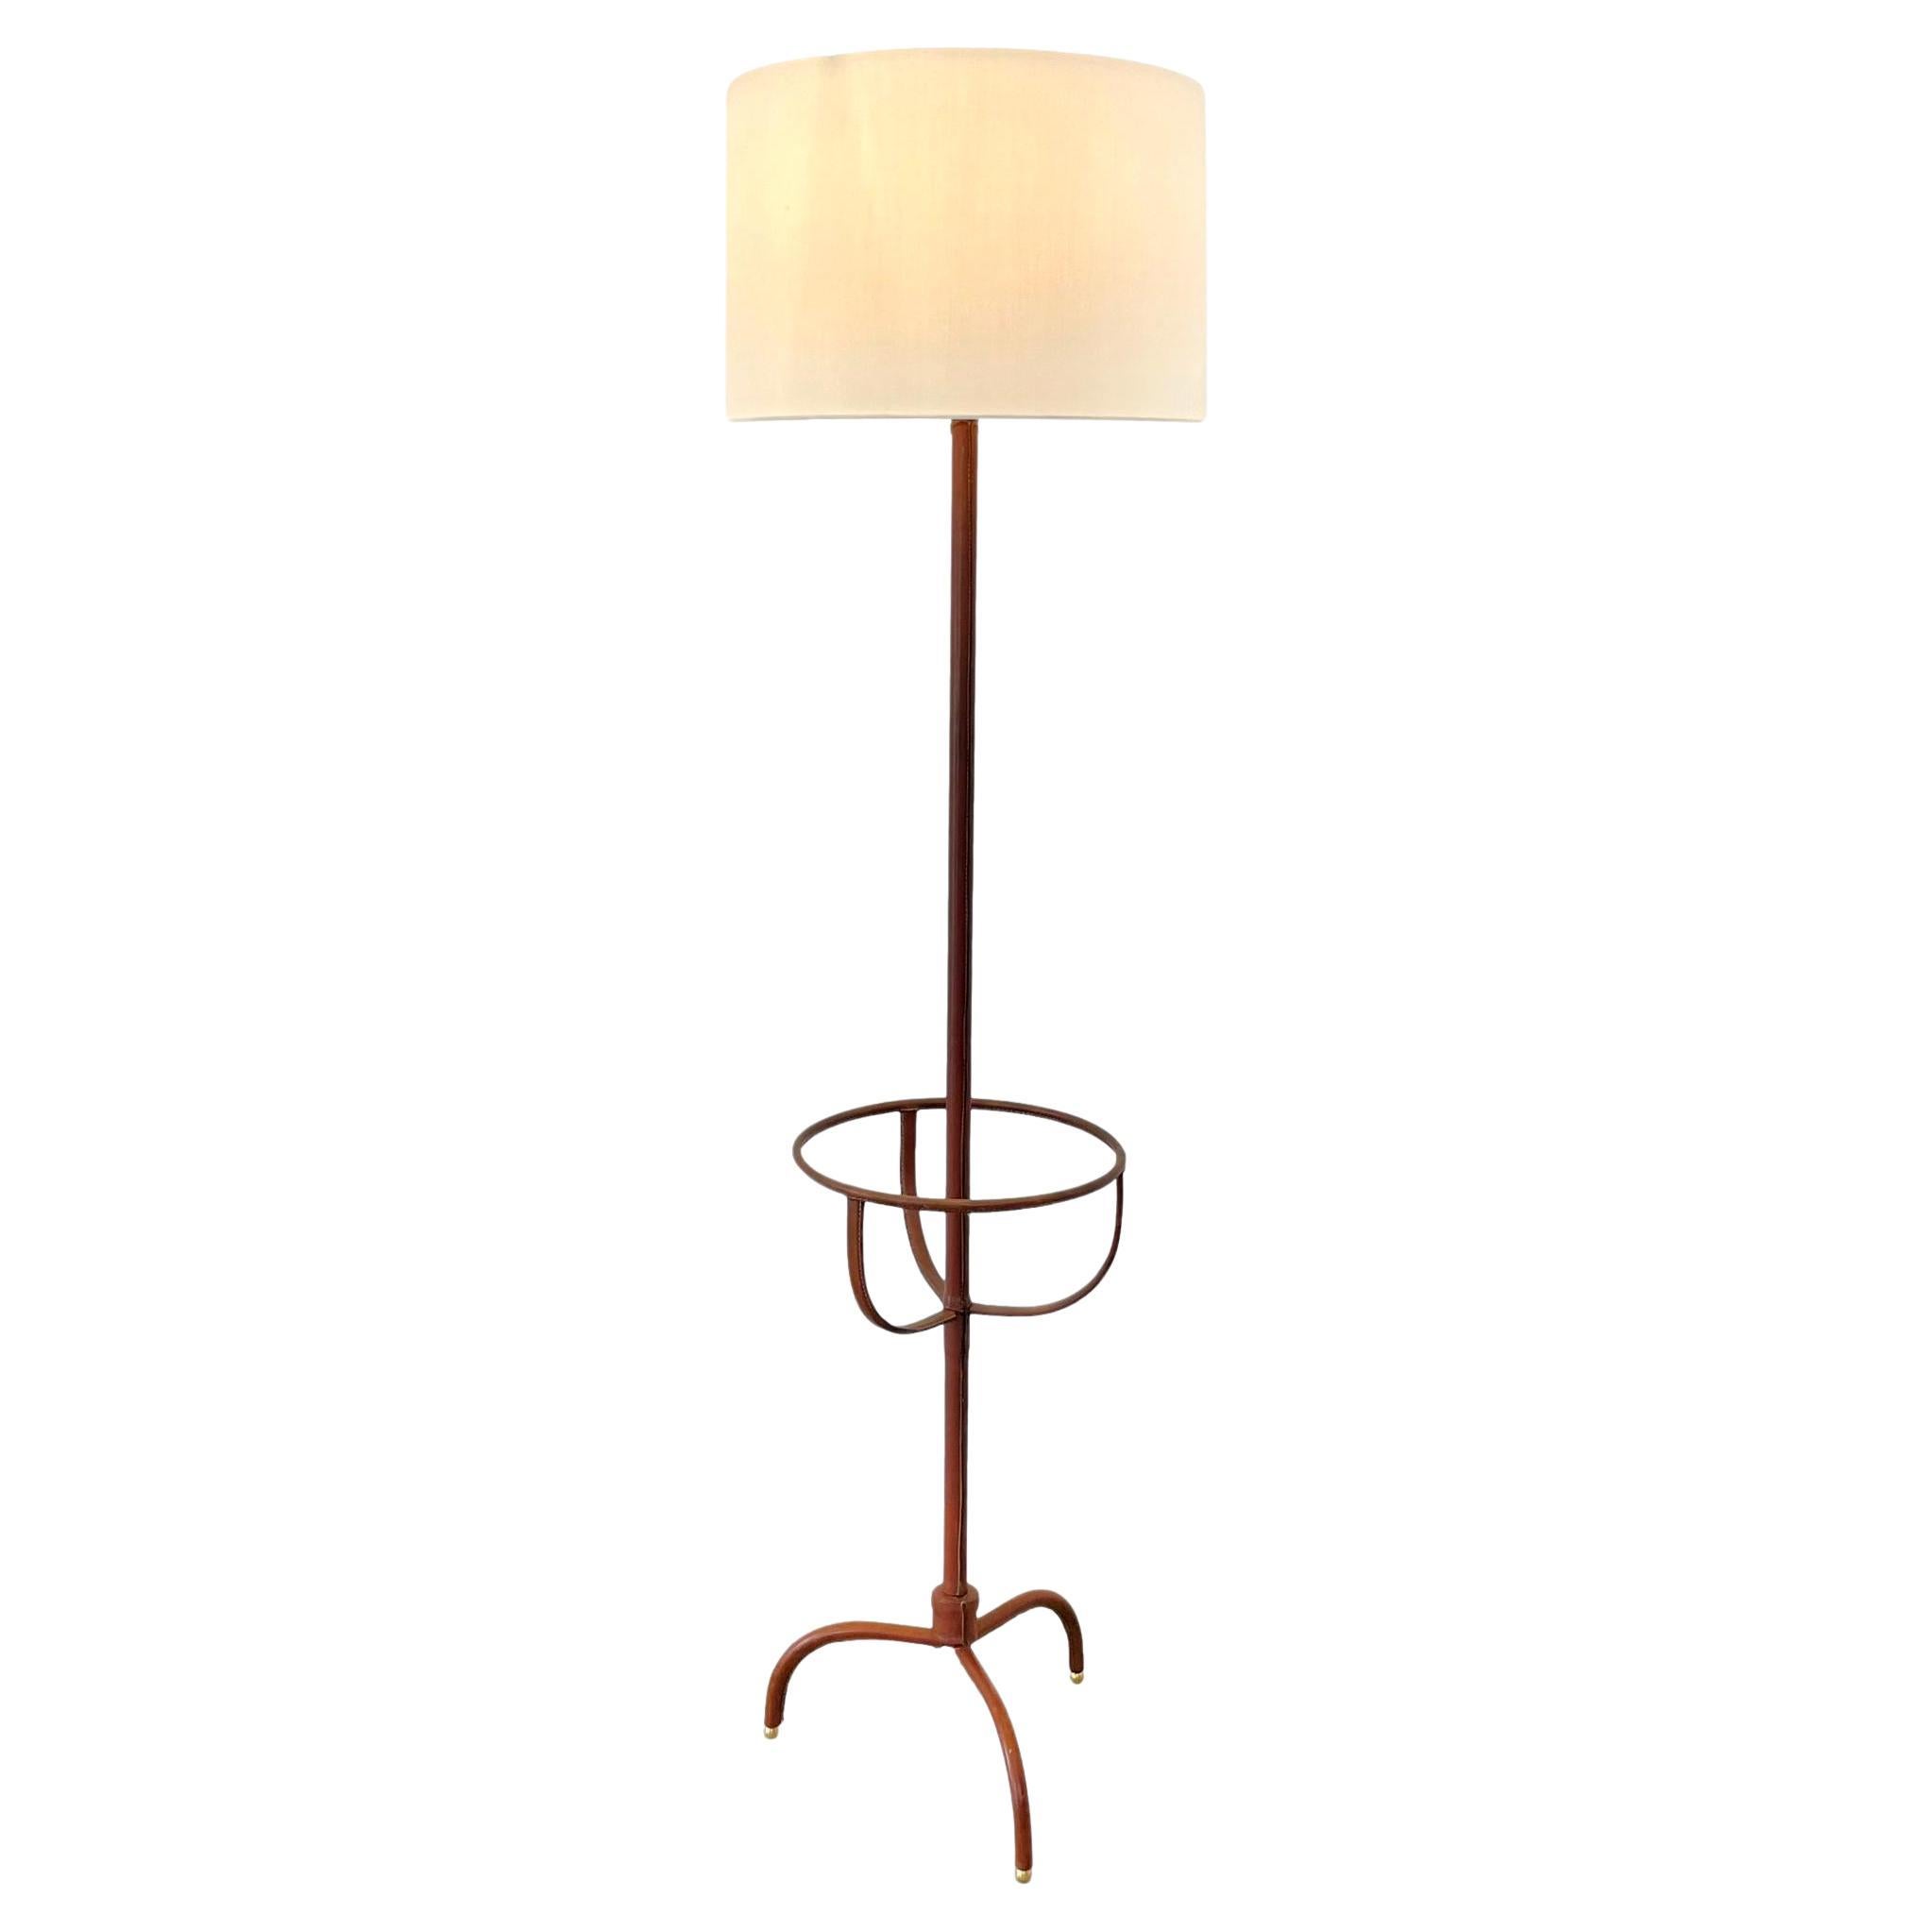 Jacques Adnet Floor Lamp in Saddle Leather, 1950s France For Sale